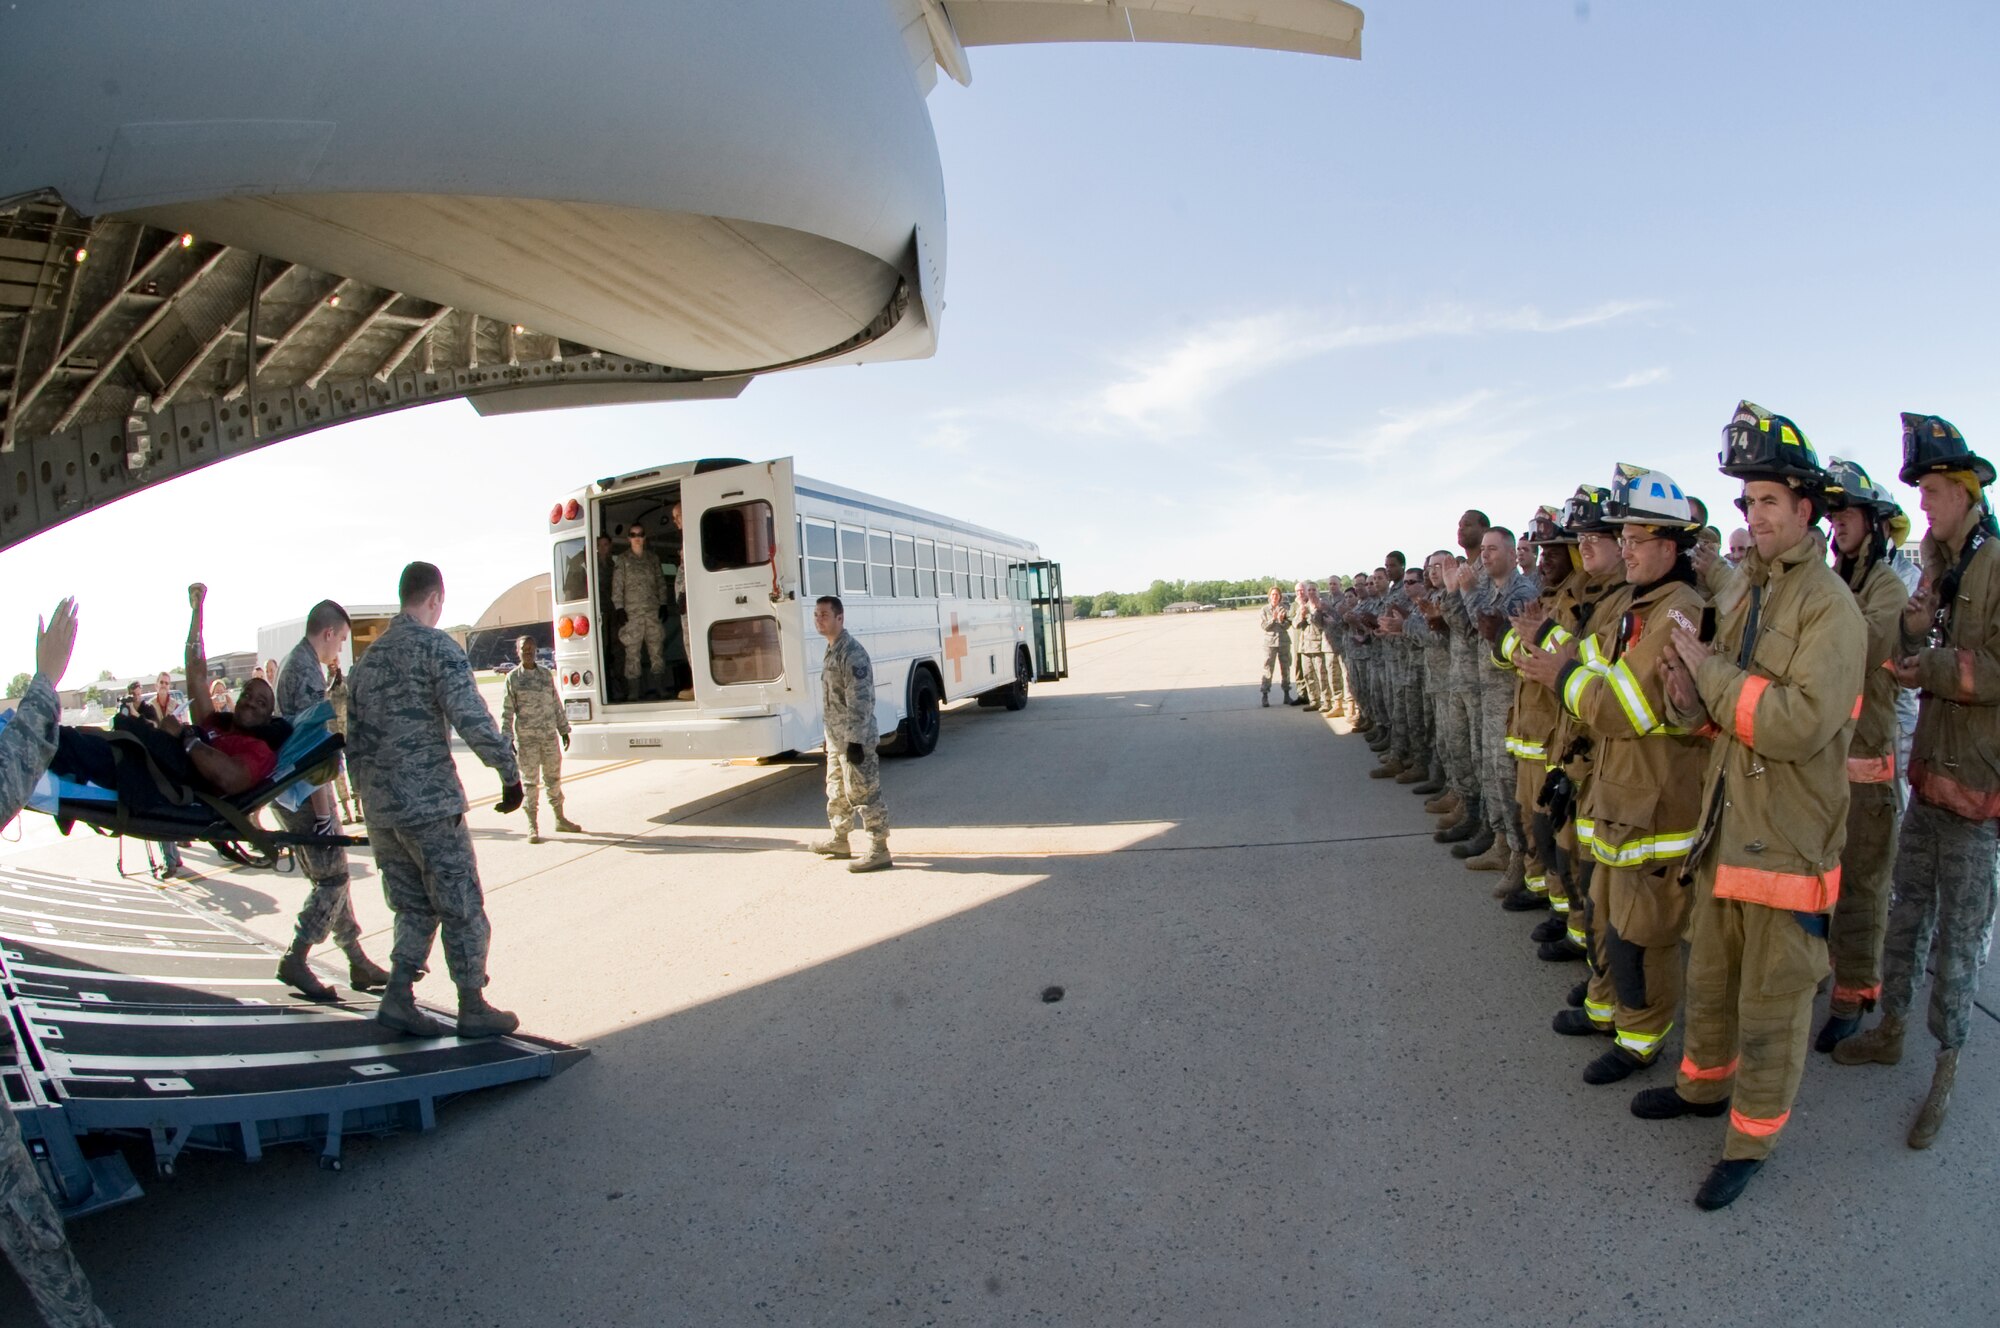 Tech. Sgt. John Knight, 2nd Civil Engineer Squadron firefighter, is carried off an aircraft while his fellow firefighters applaud him on the flightline at Andrews Air Force Base, Md., May 10. Sergeant Knight stopped at Andrews on his way back from Afghanistan, where he was wounded and presented with the Purple Heart. (Courtesy photo)